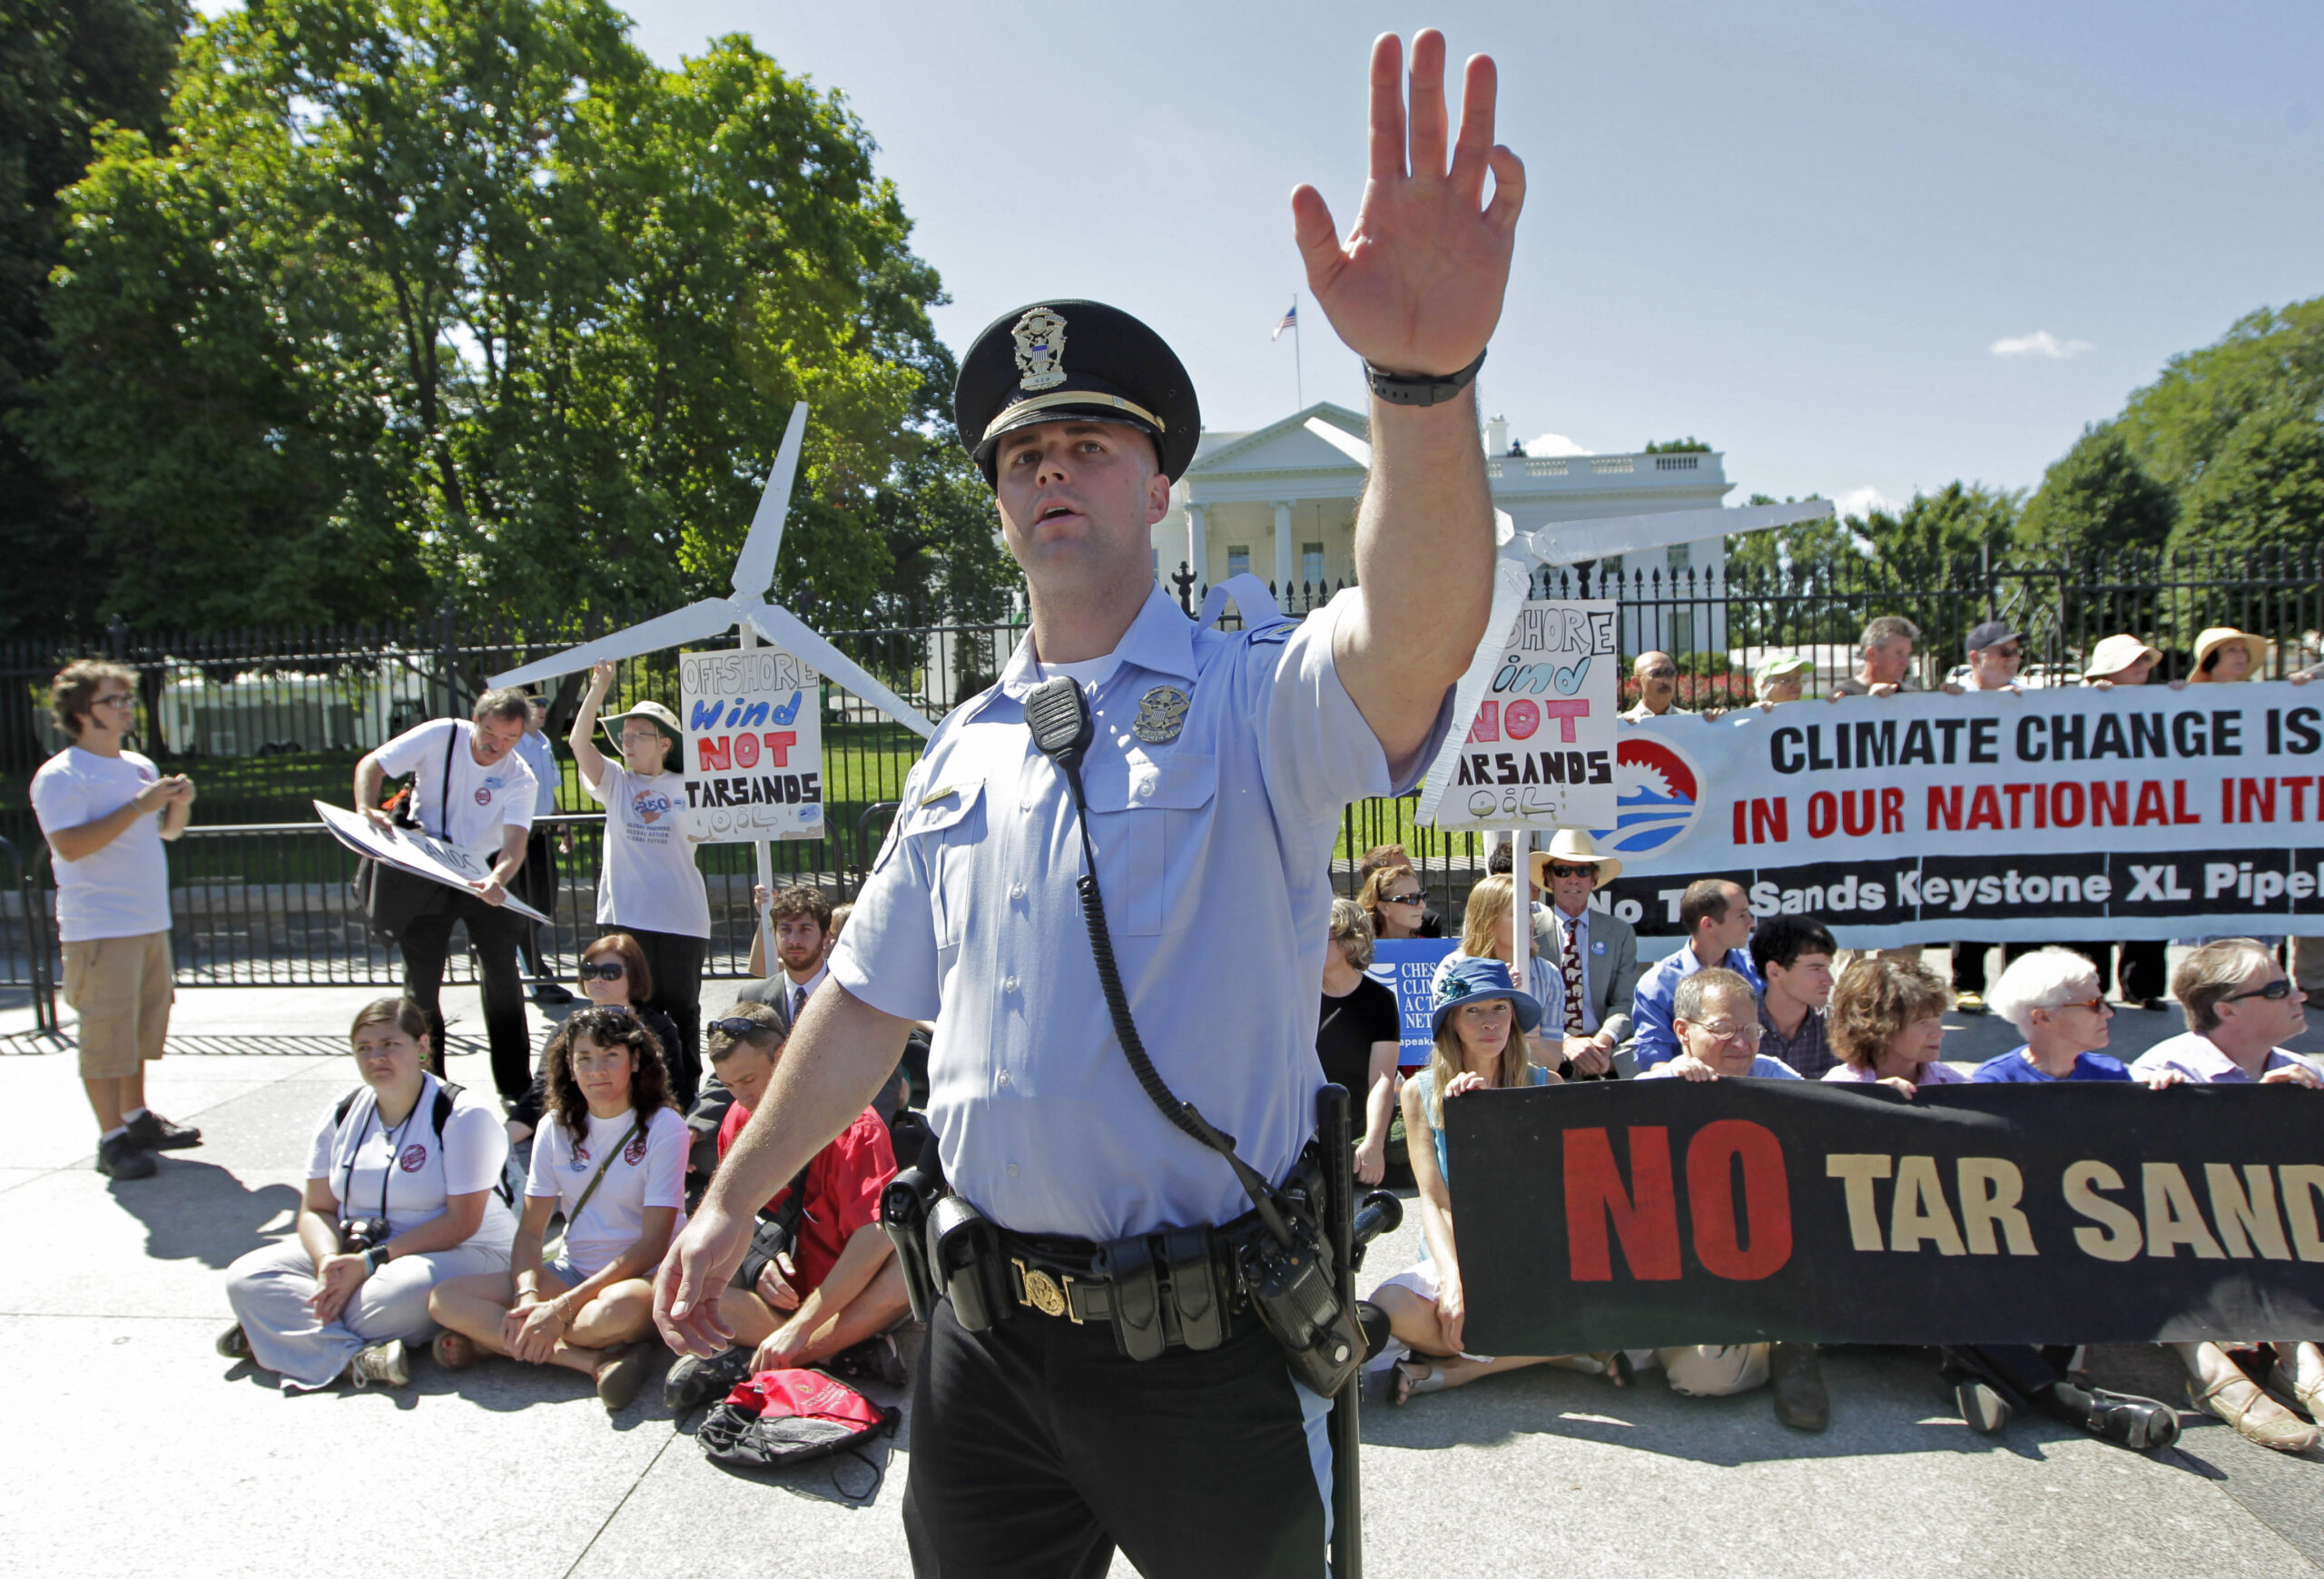 A police officer in front of activists protesting tar sands pipelines in front of the White House